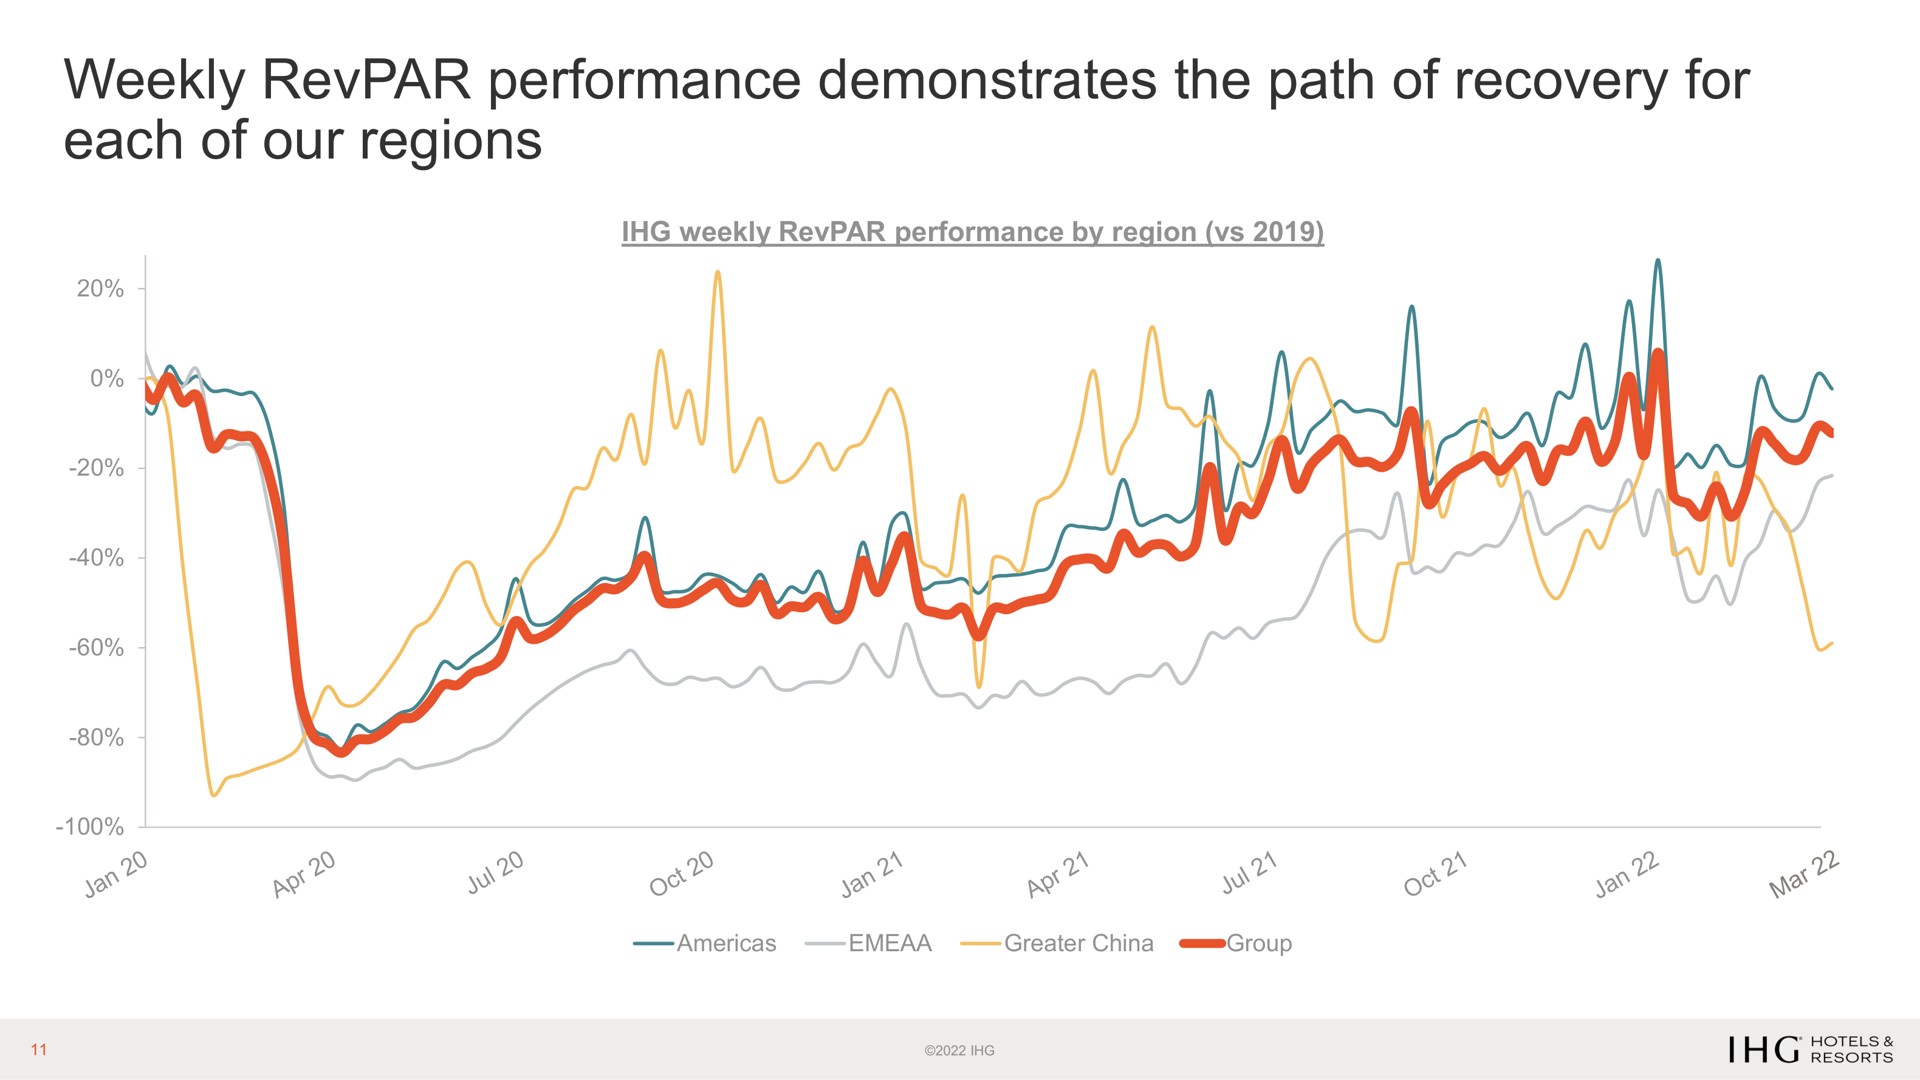 weekly performance demonstrates the path of recovery for each of our regions | IHG Hotels